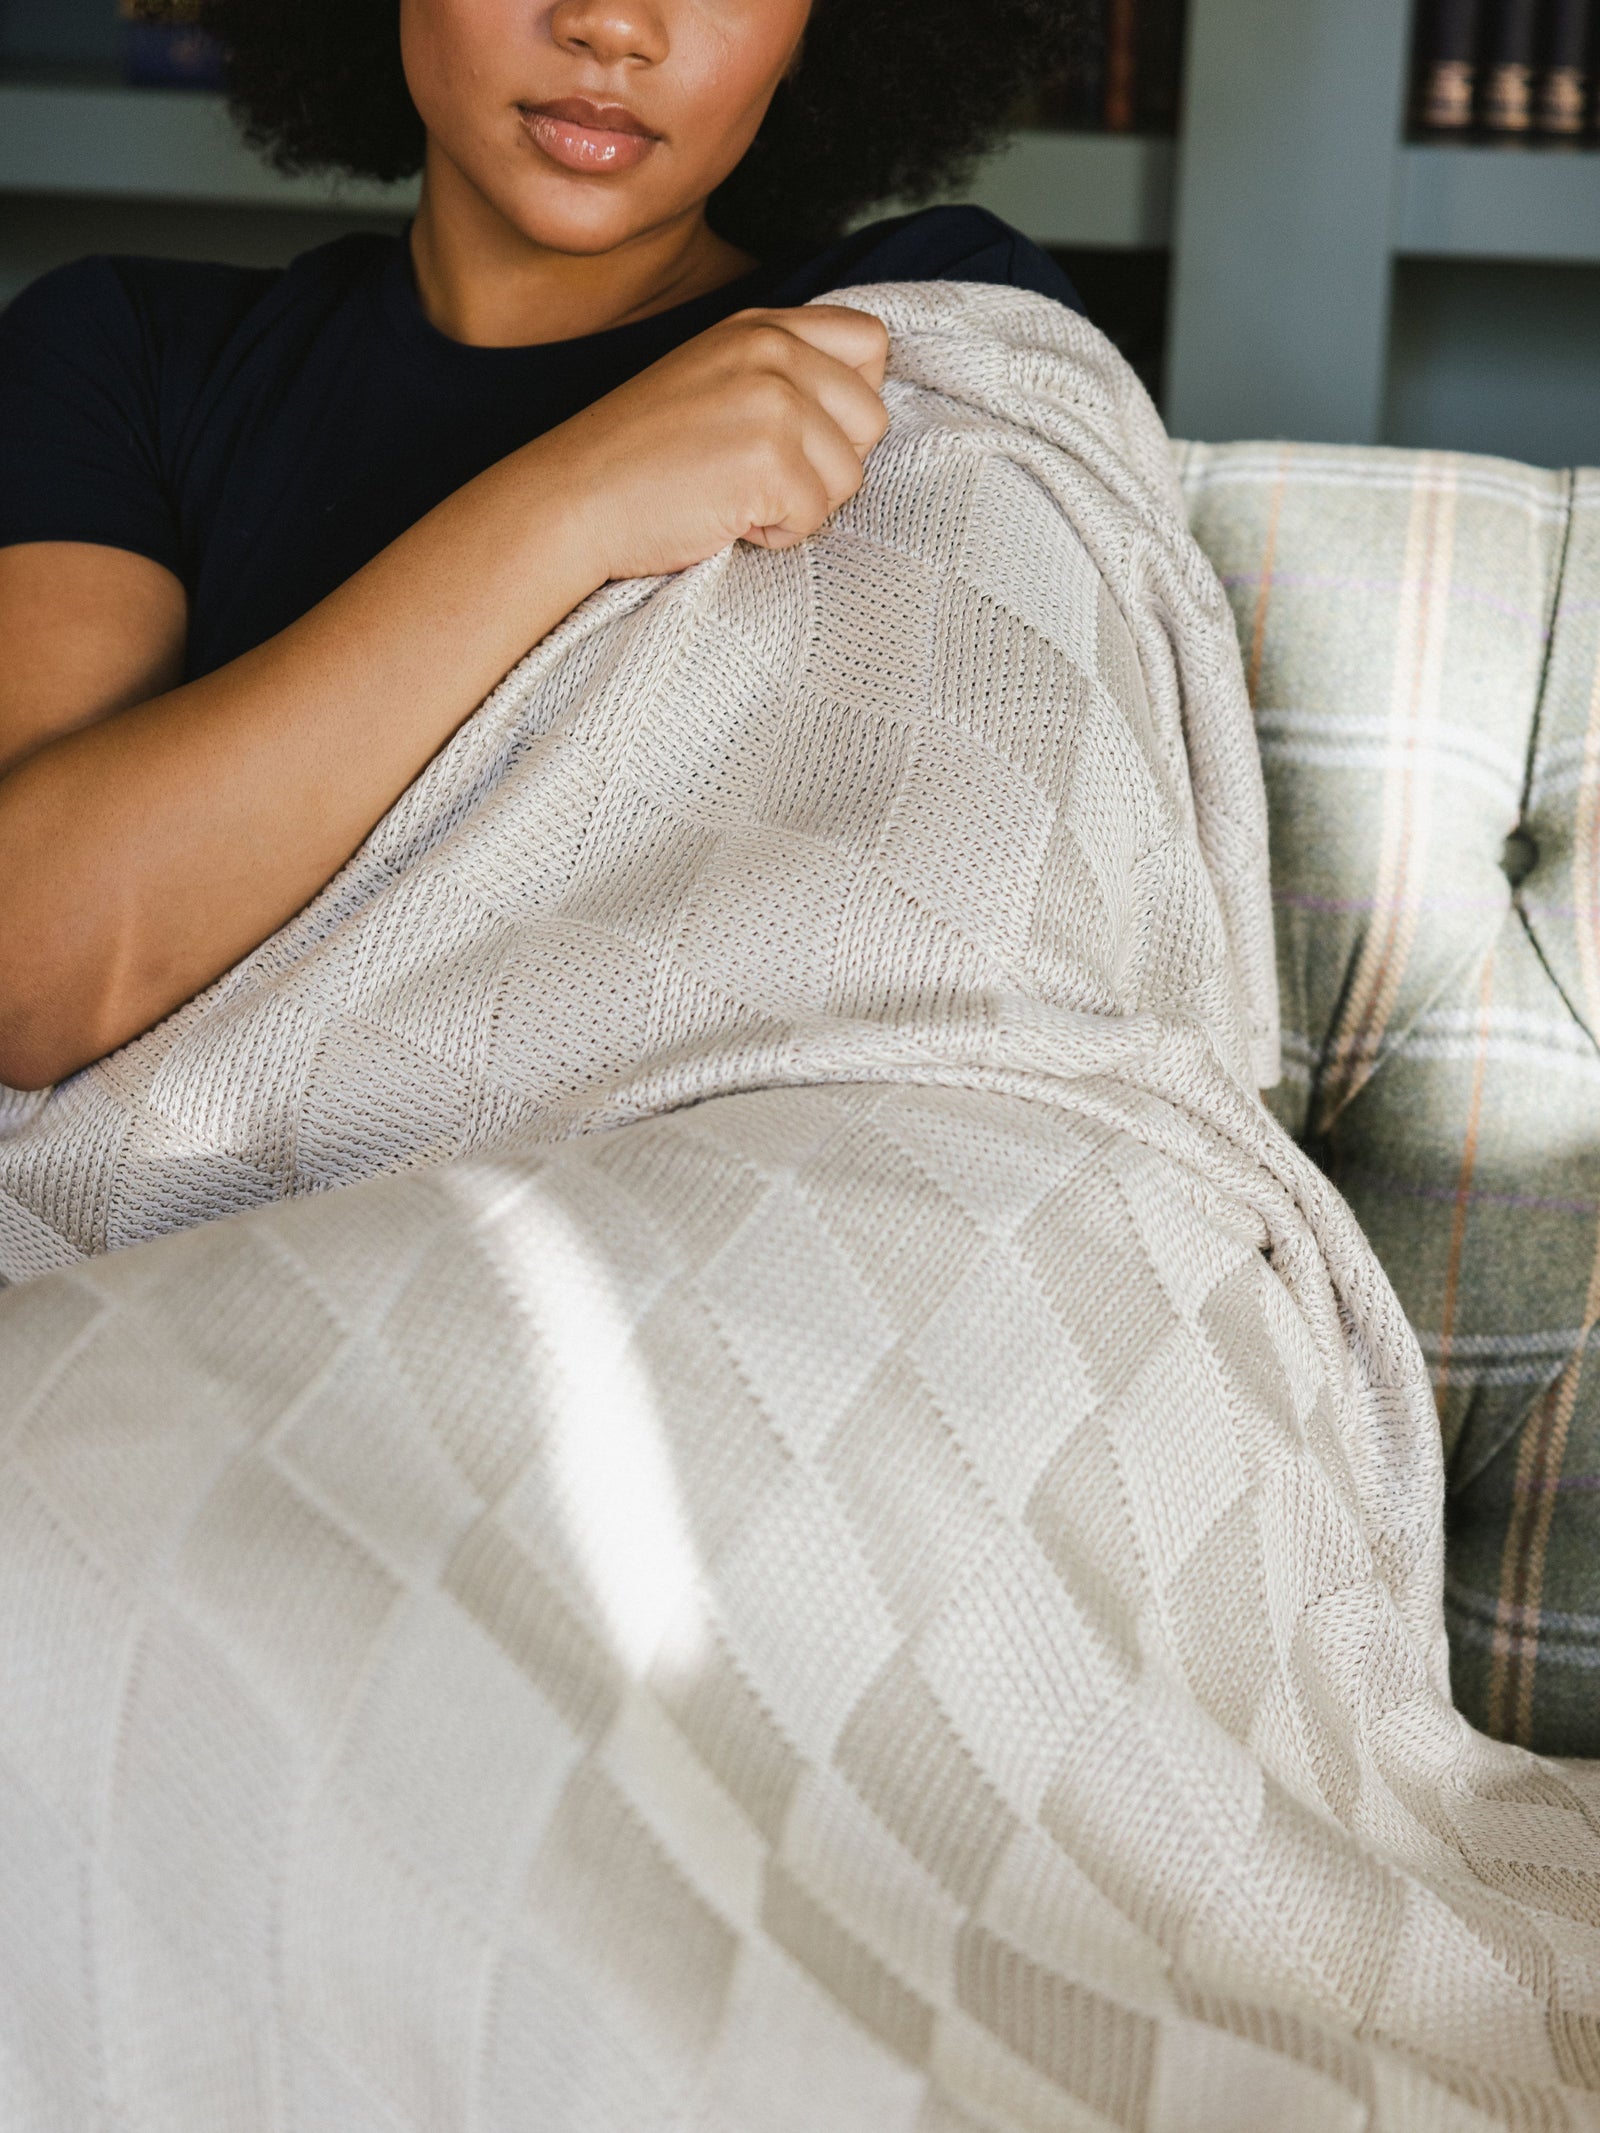 Beige Diamond Knit Blanket photographed in a home living room. A woman holds the blanket over her shoulder. 